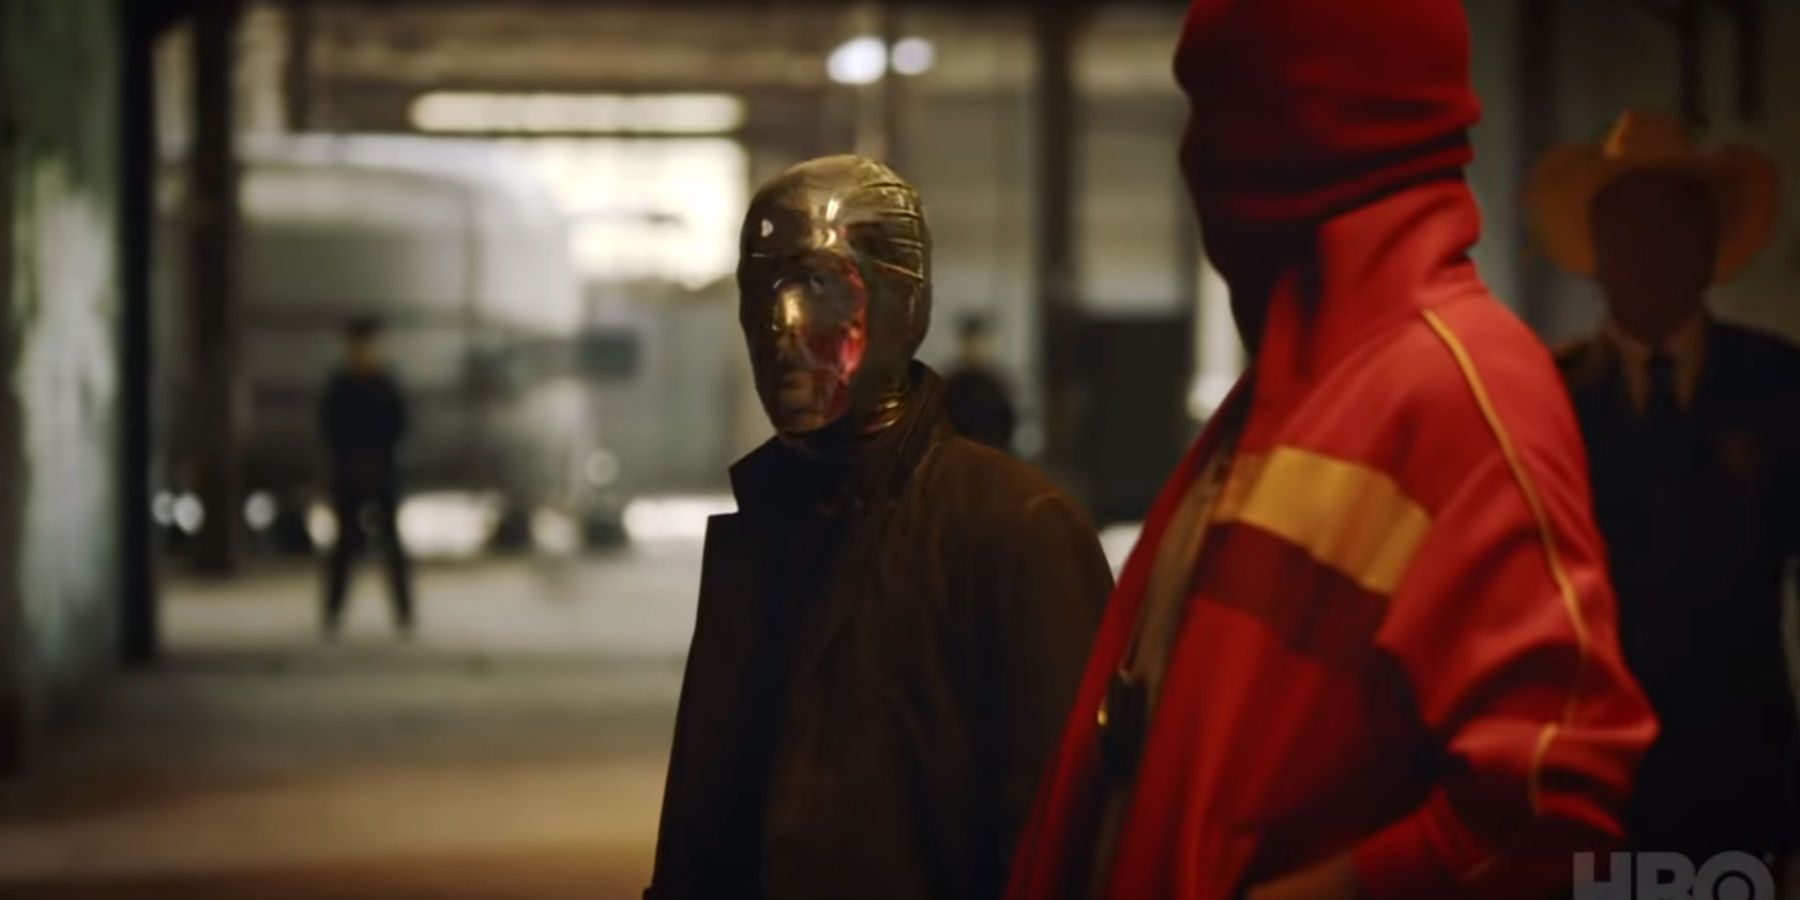 HBO Watchmen - Red and Gold Masks